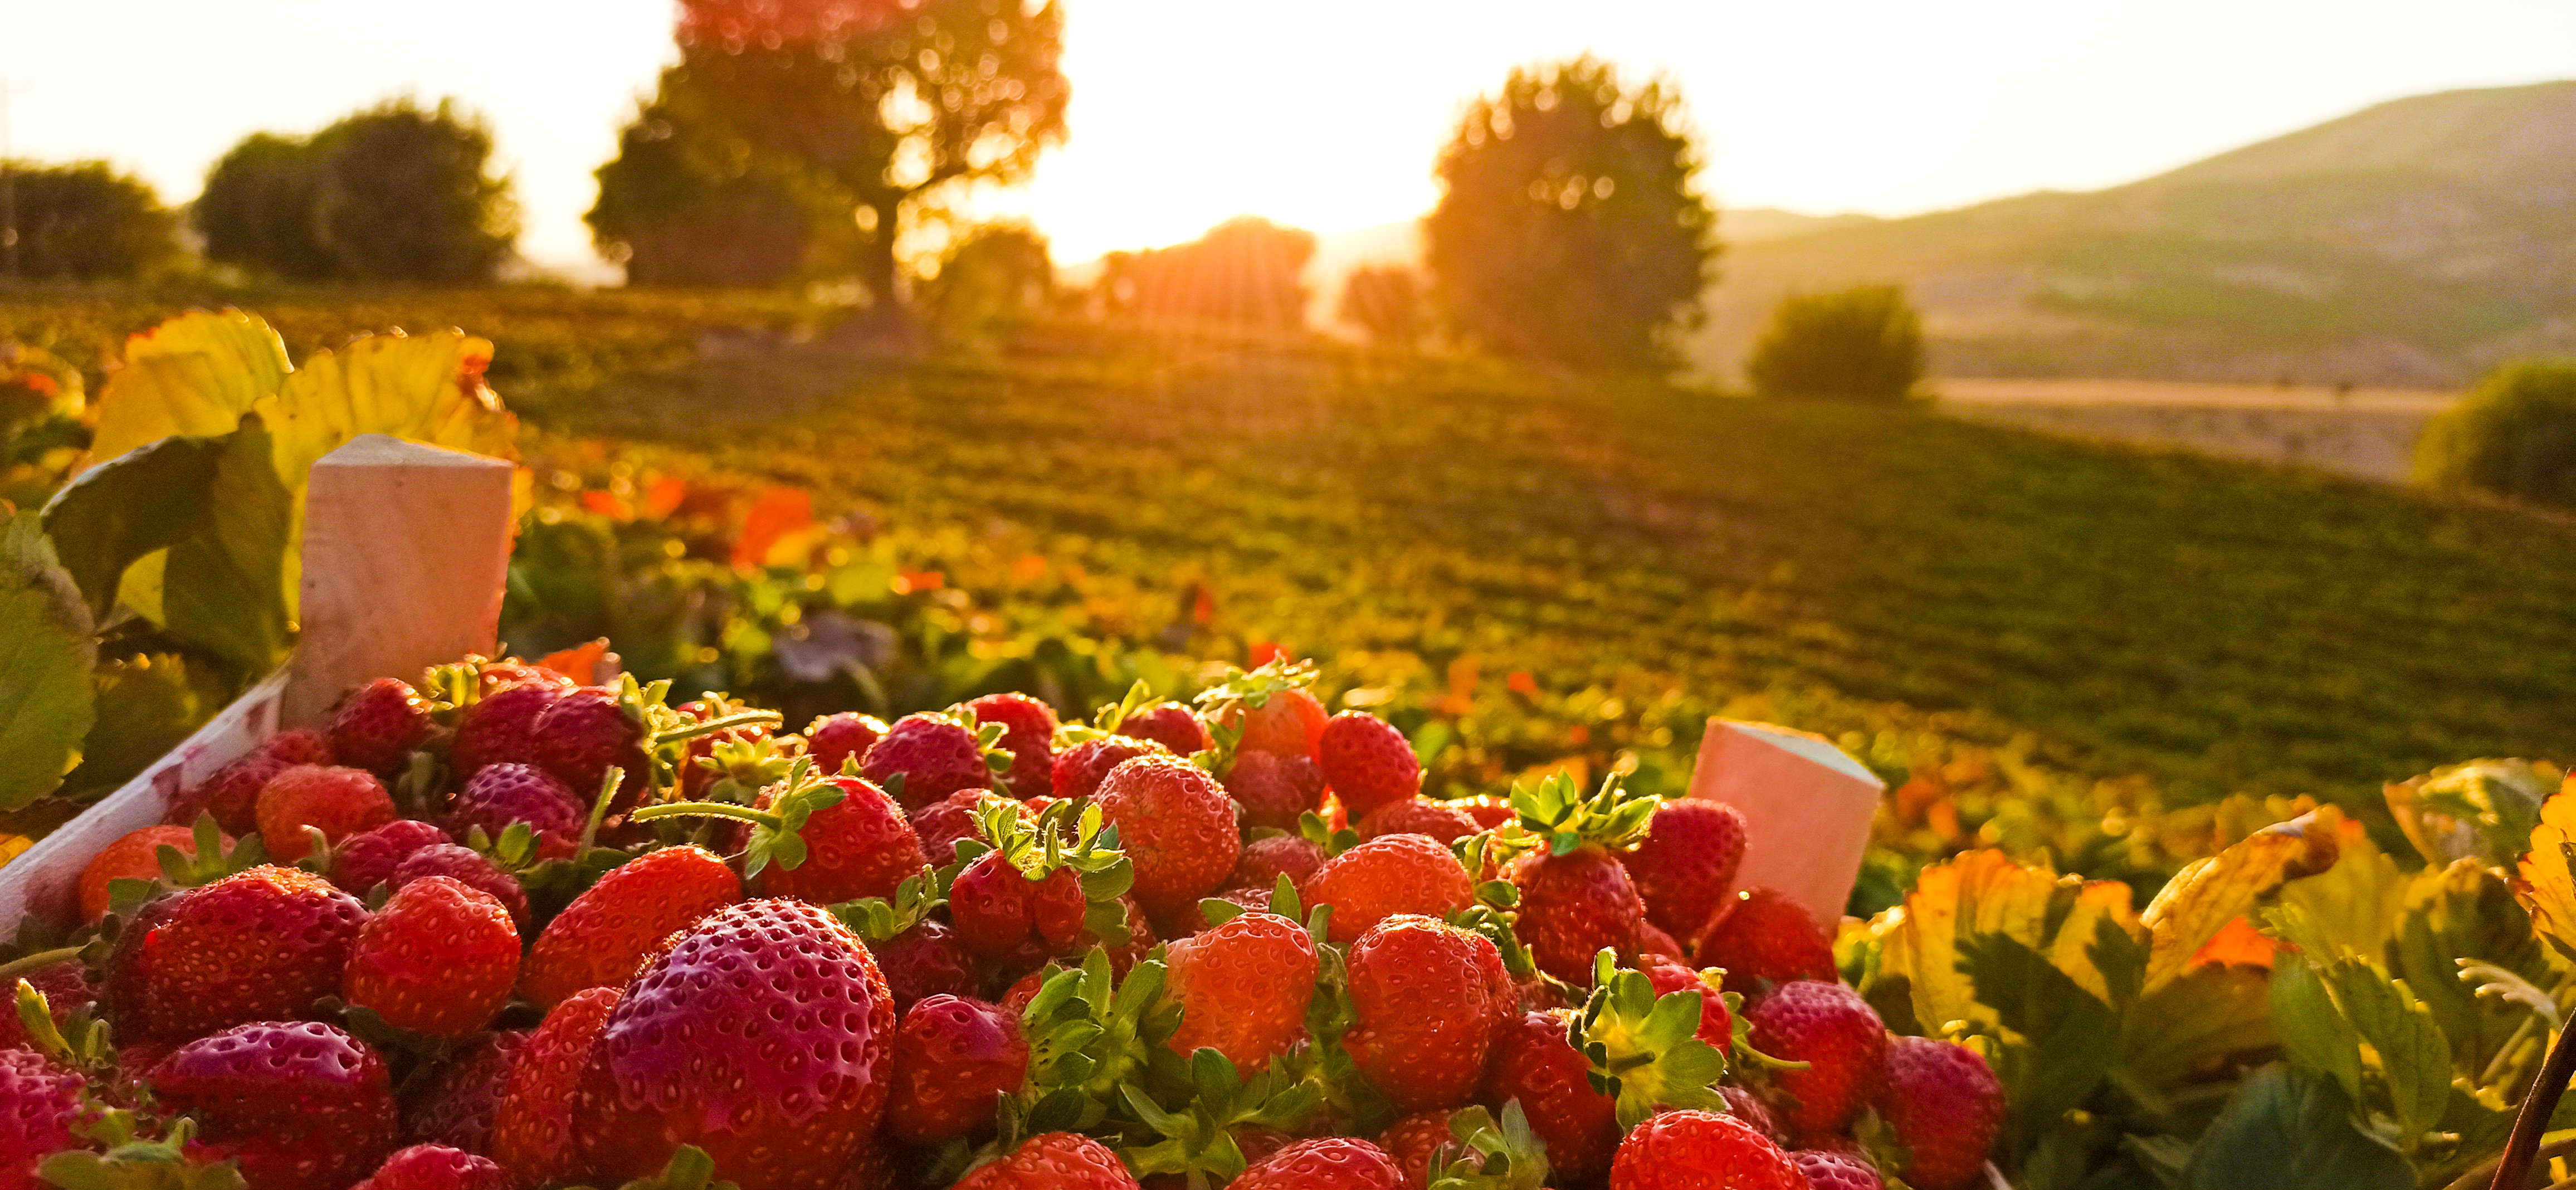 General 4624x2136 strawberries nature plants fruit field sunlight trees leaves closeup blurred blurry background sunset sunset glow